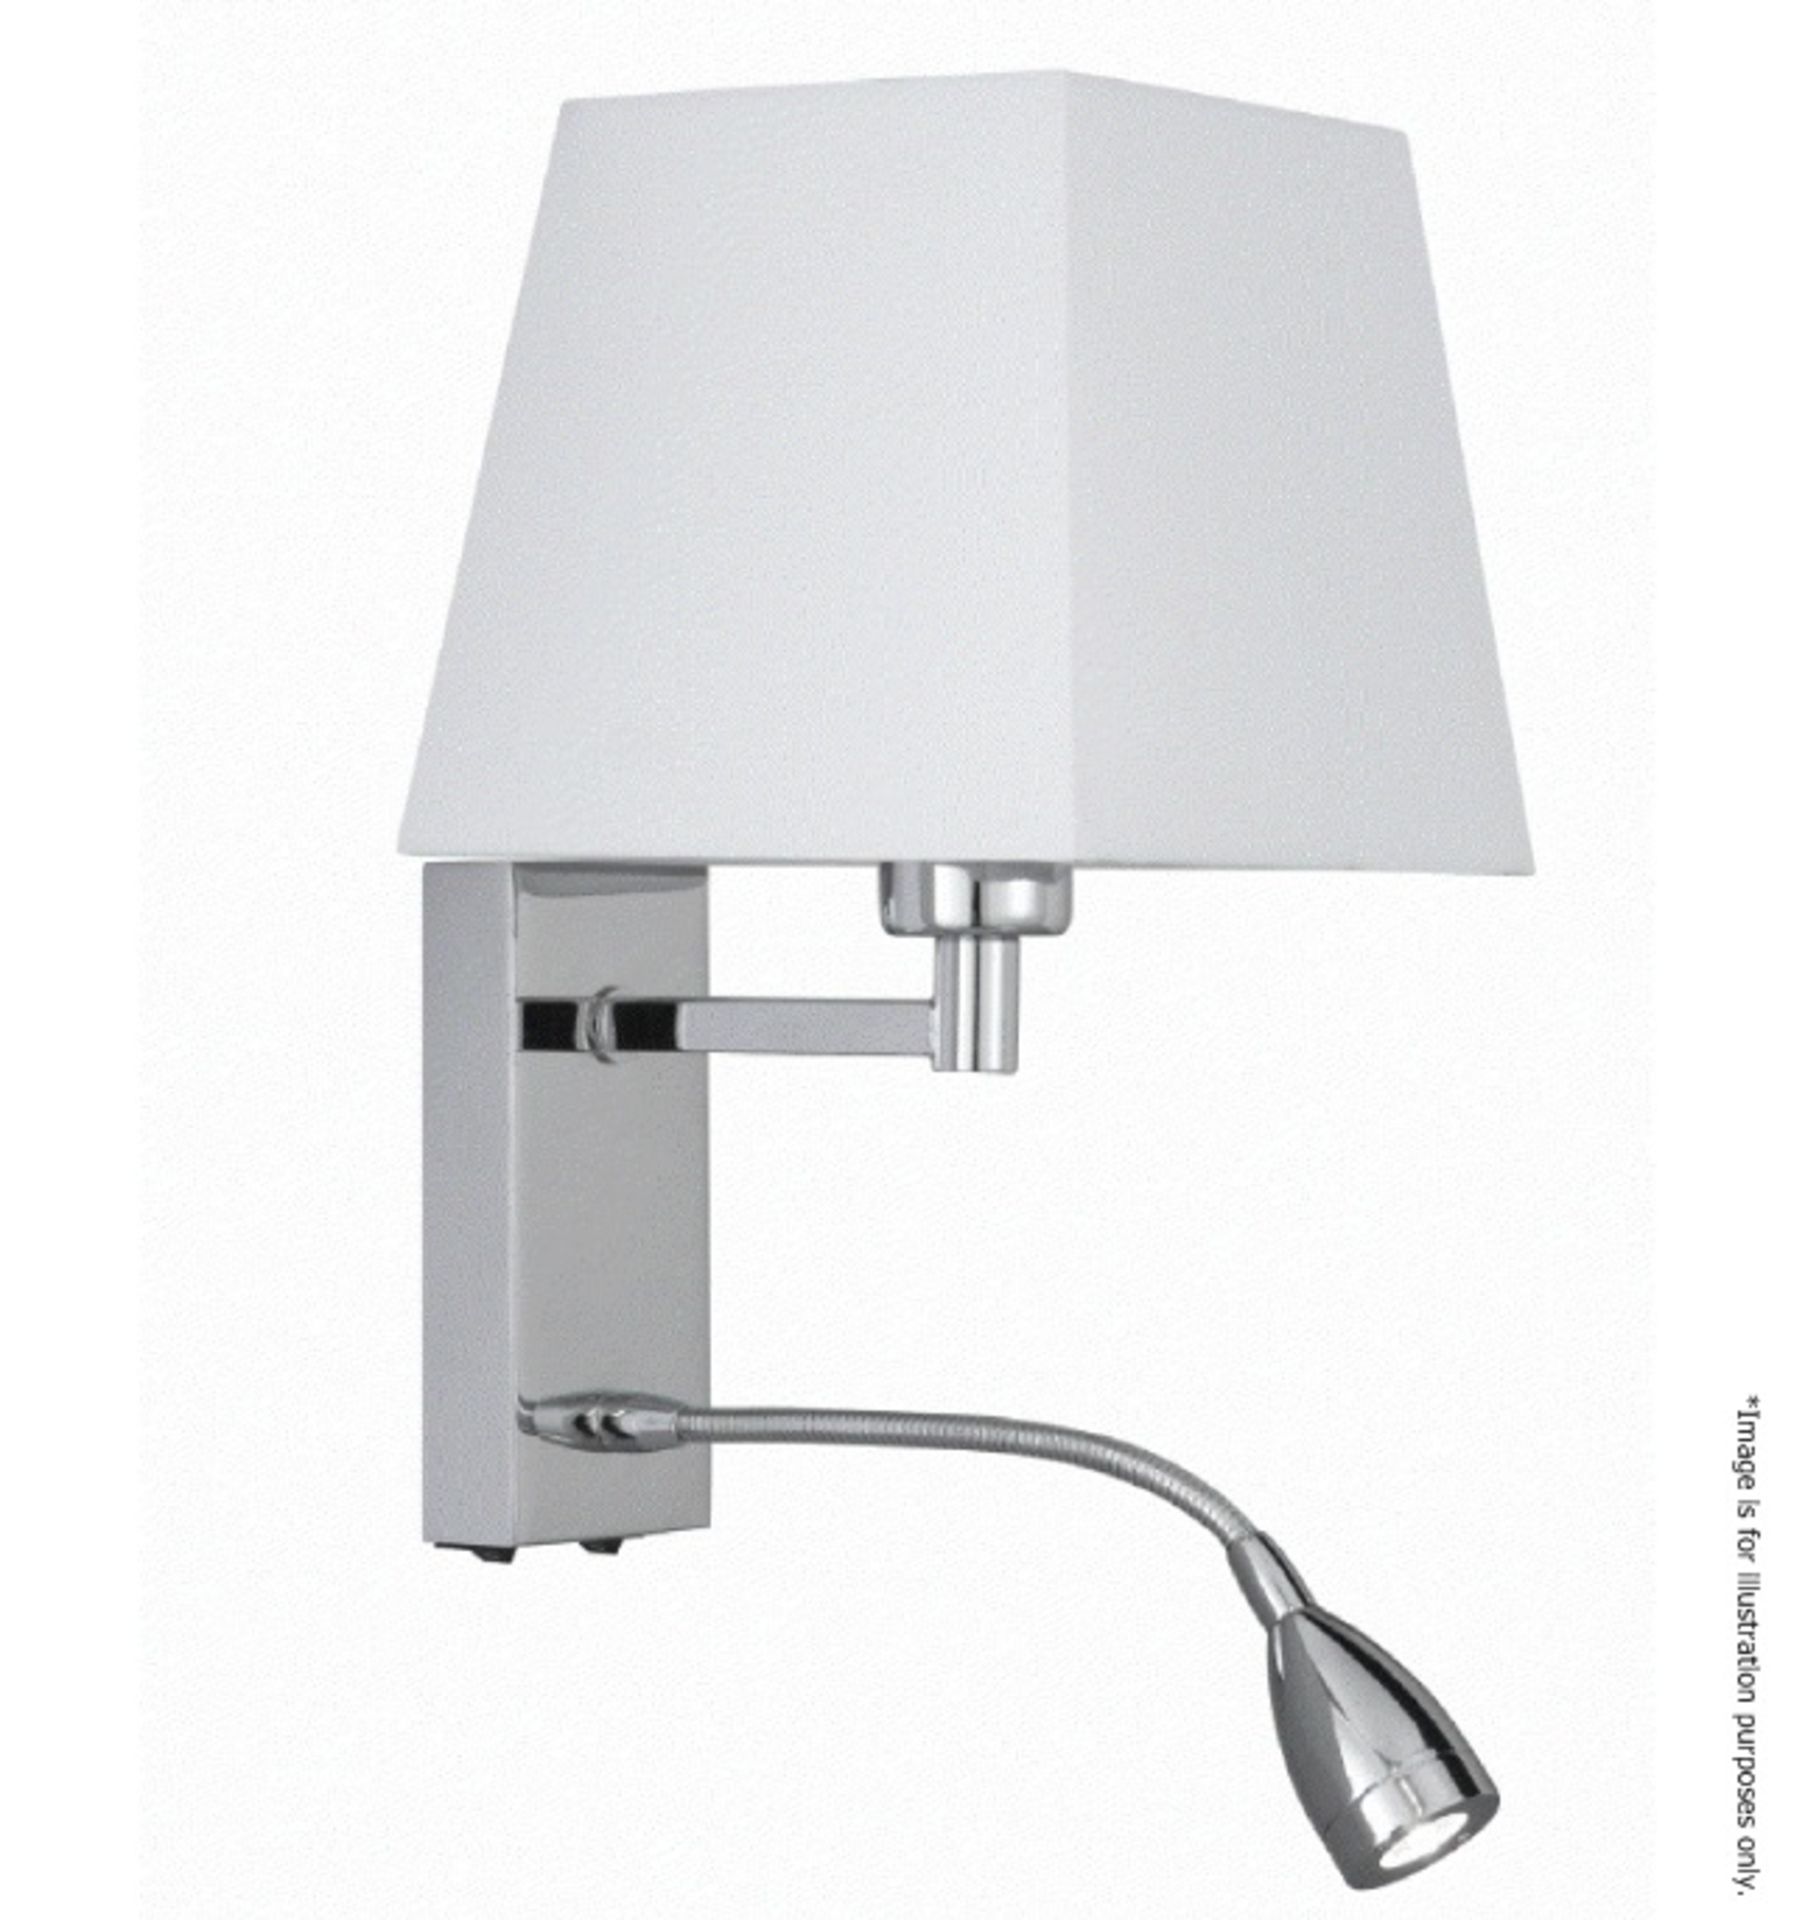 1 x Chrome Wall Light With White Shade Incorporating Led Flexi-arm - Ex Display - RRP £136.80